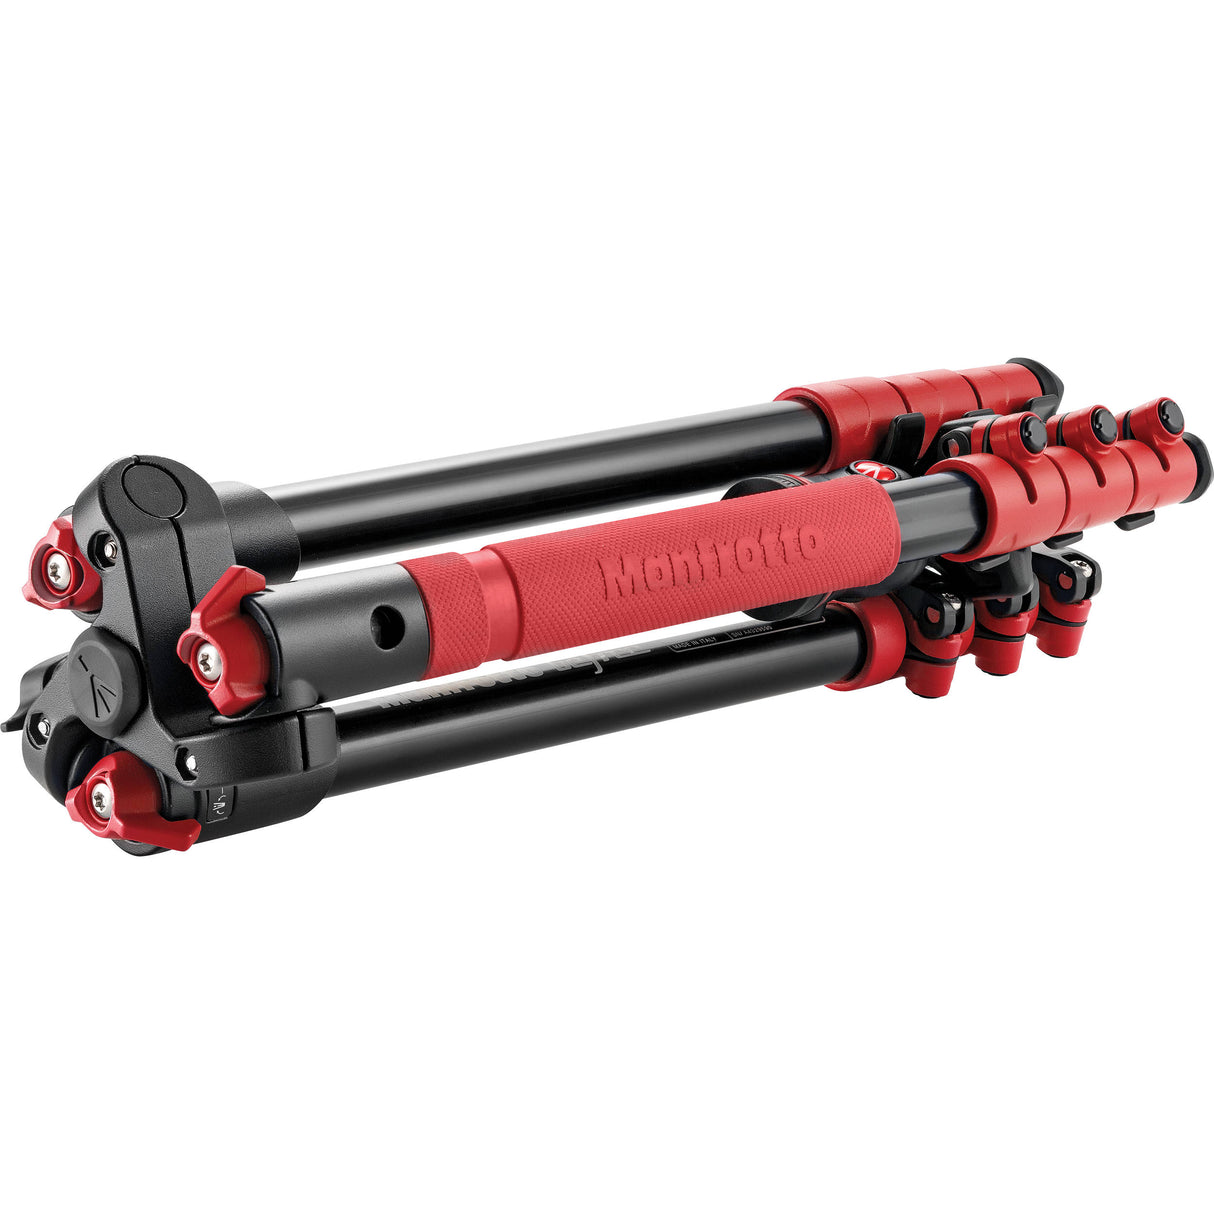 Manfrotto BeFree Compact Travel Aluminum Alloy Tripod Red